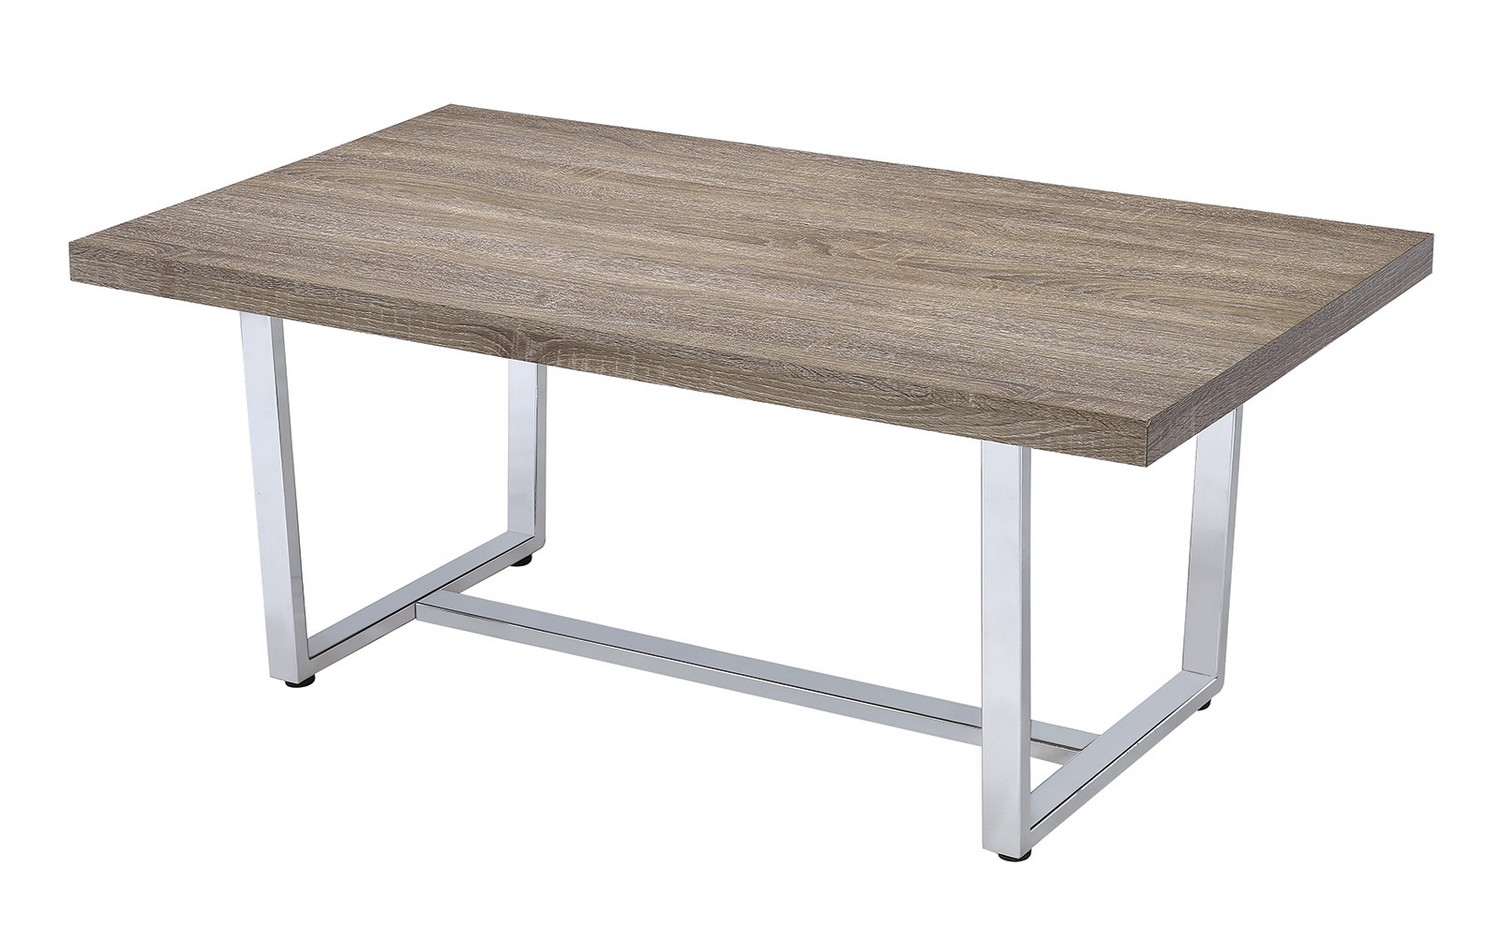 Coaster 704188 Coffee/Cocktail Table - Weathered Taupe/chrome Metal